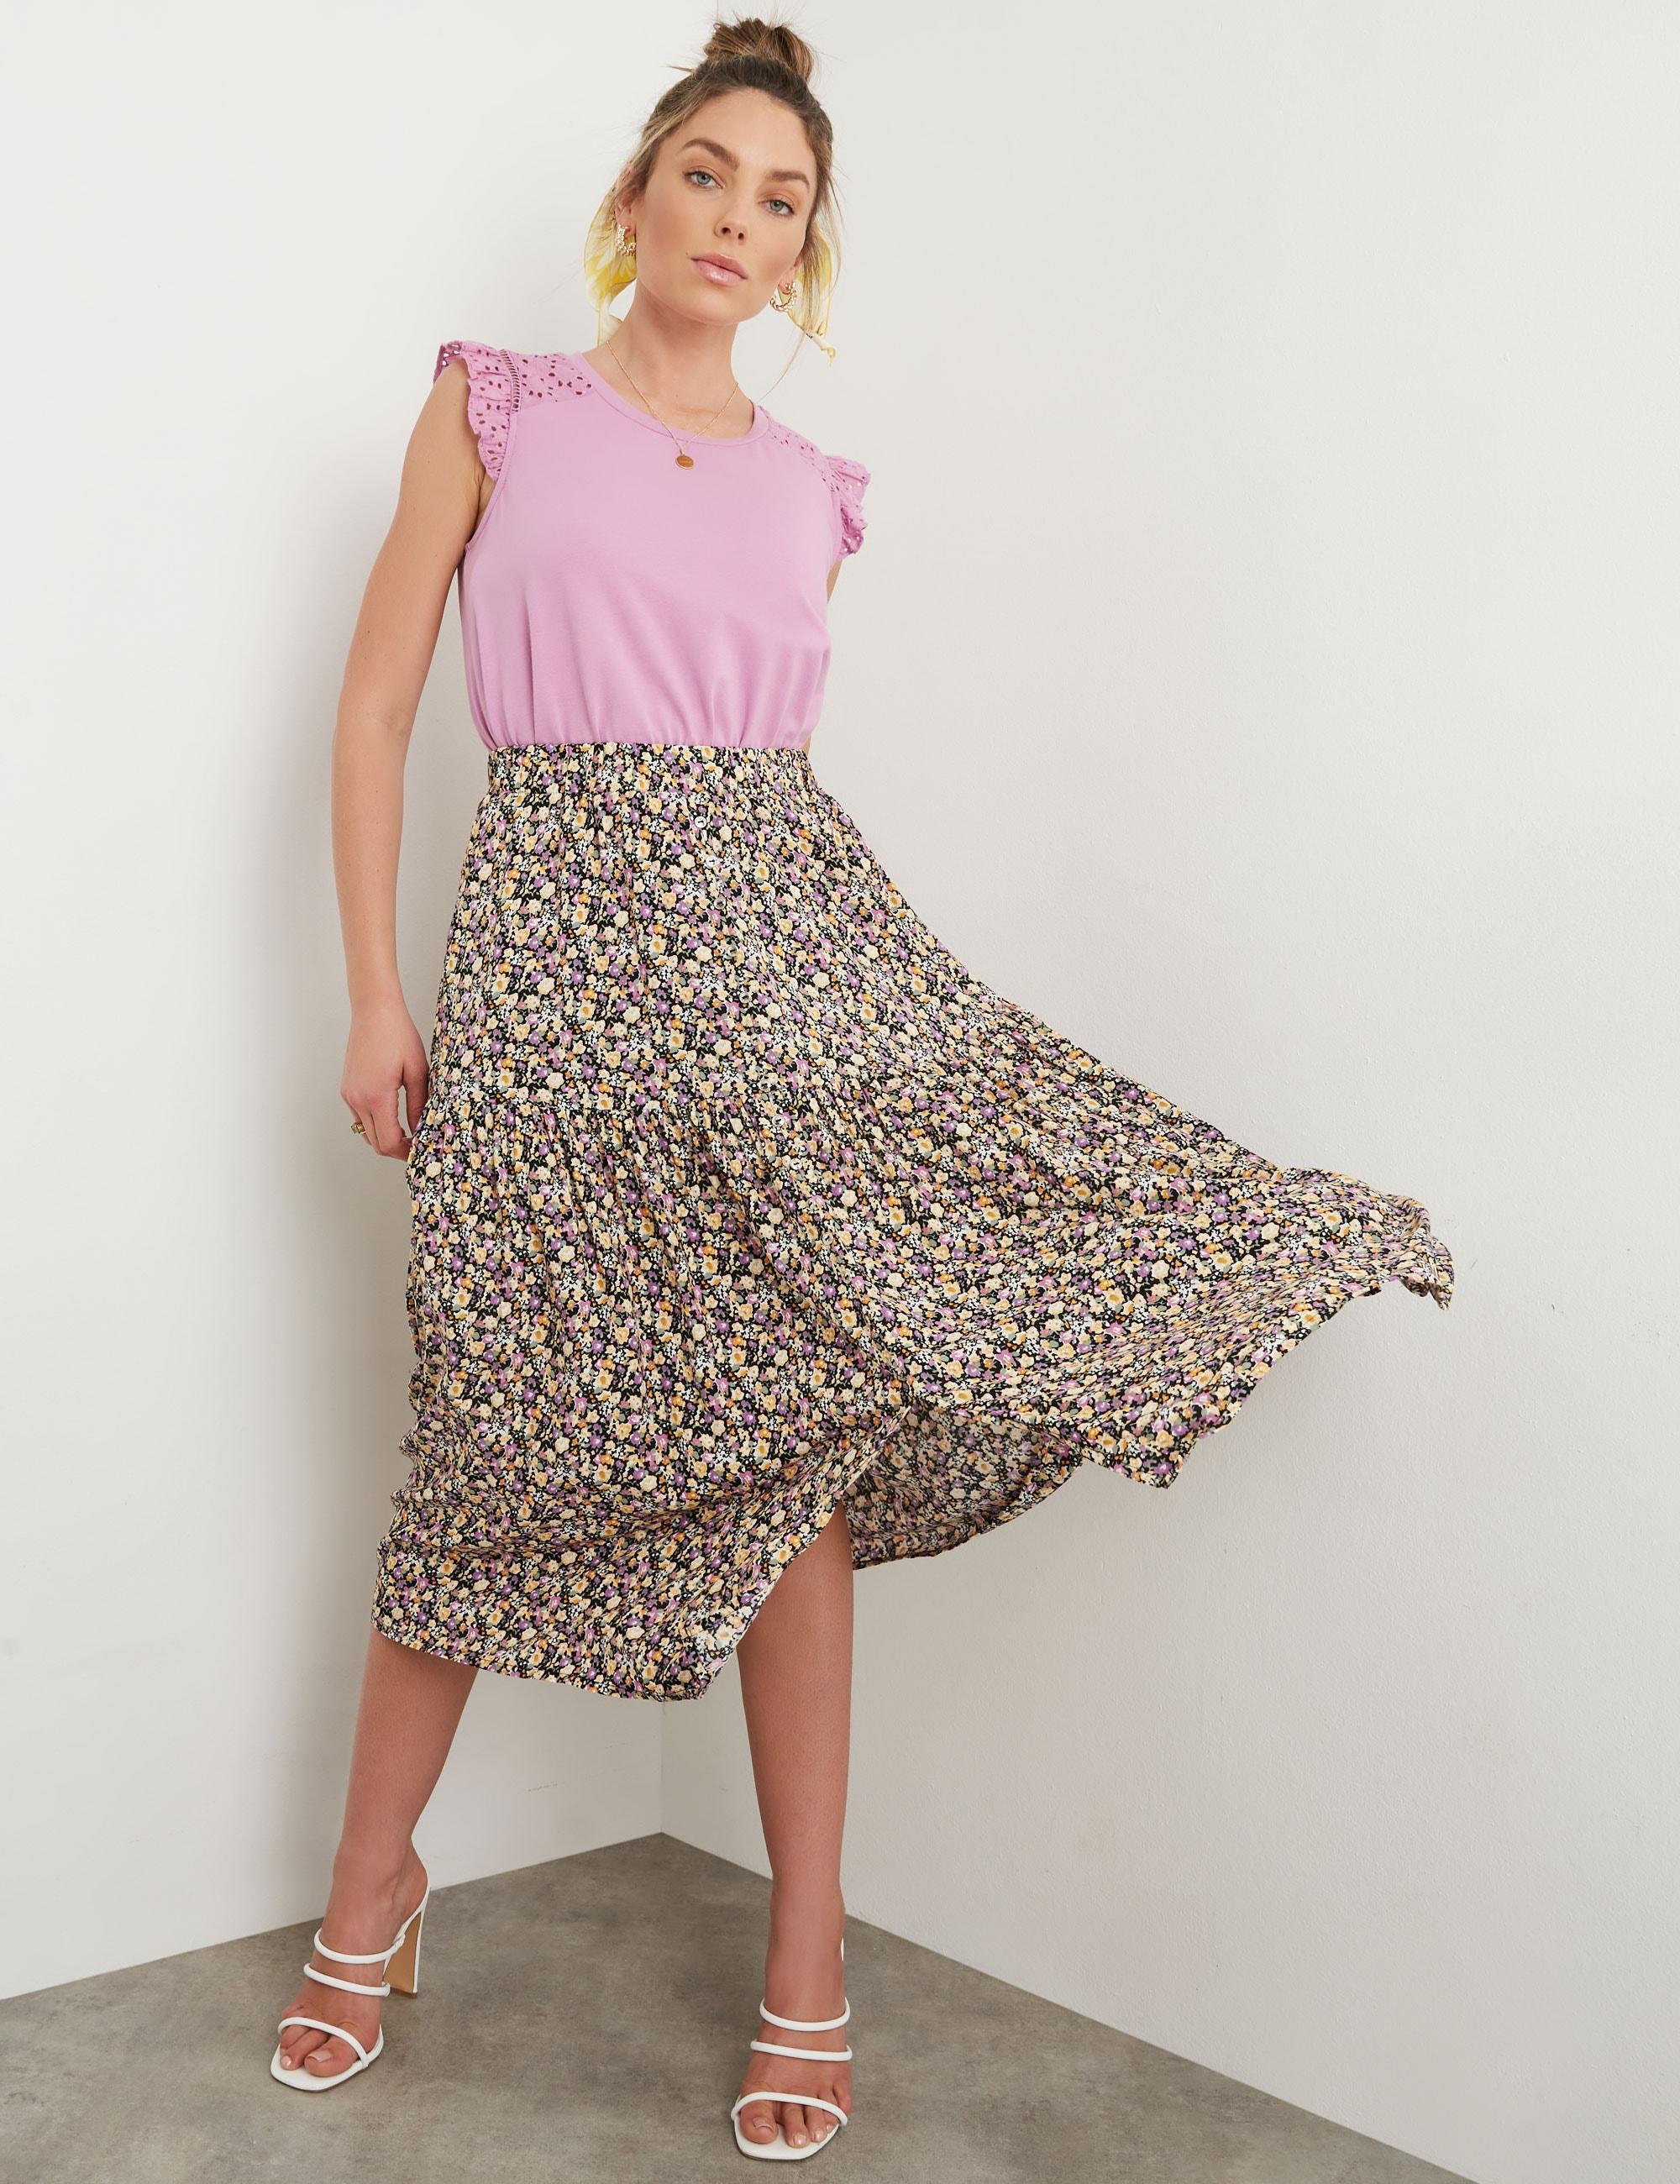 ROCKMANS - Womens Skirts - Midi - Summer - Black - Floral - A Line - Fashion - Oversized - Woven - Elastic Waist - Button Detail - Casual Work Clothes